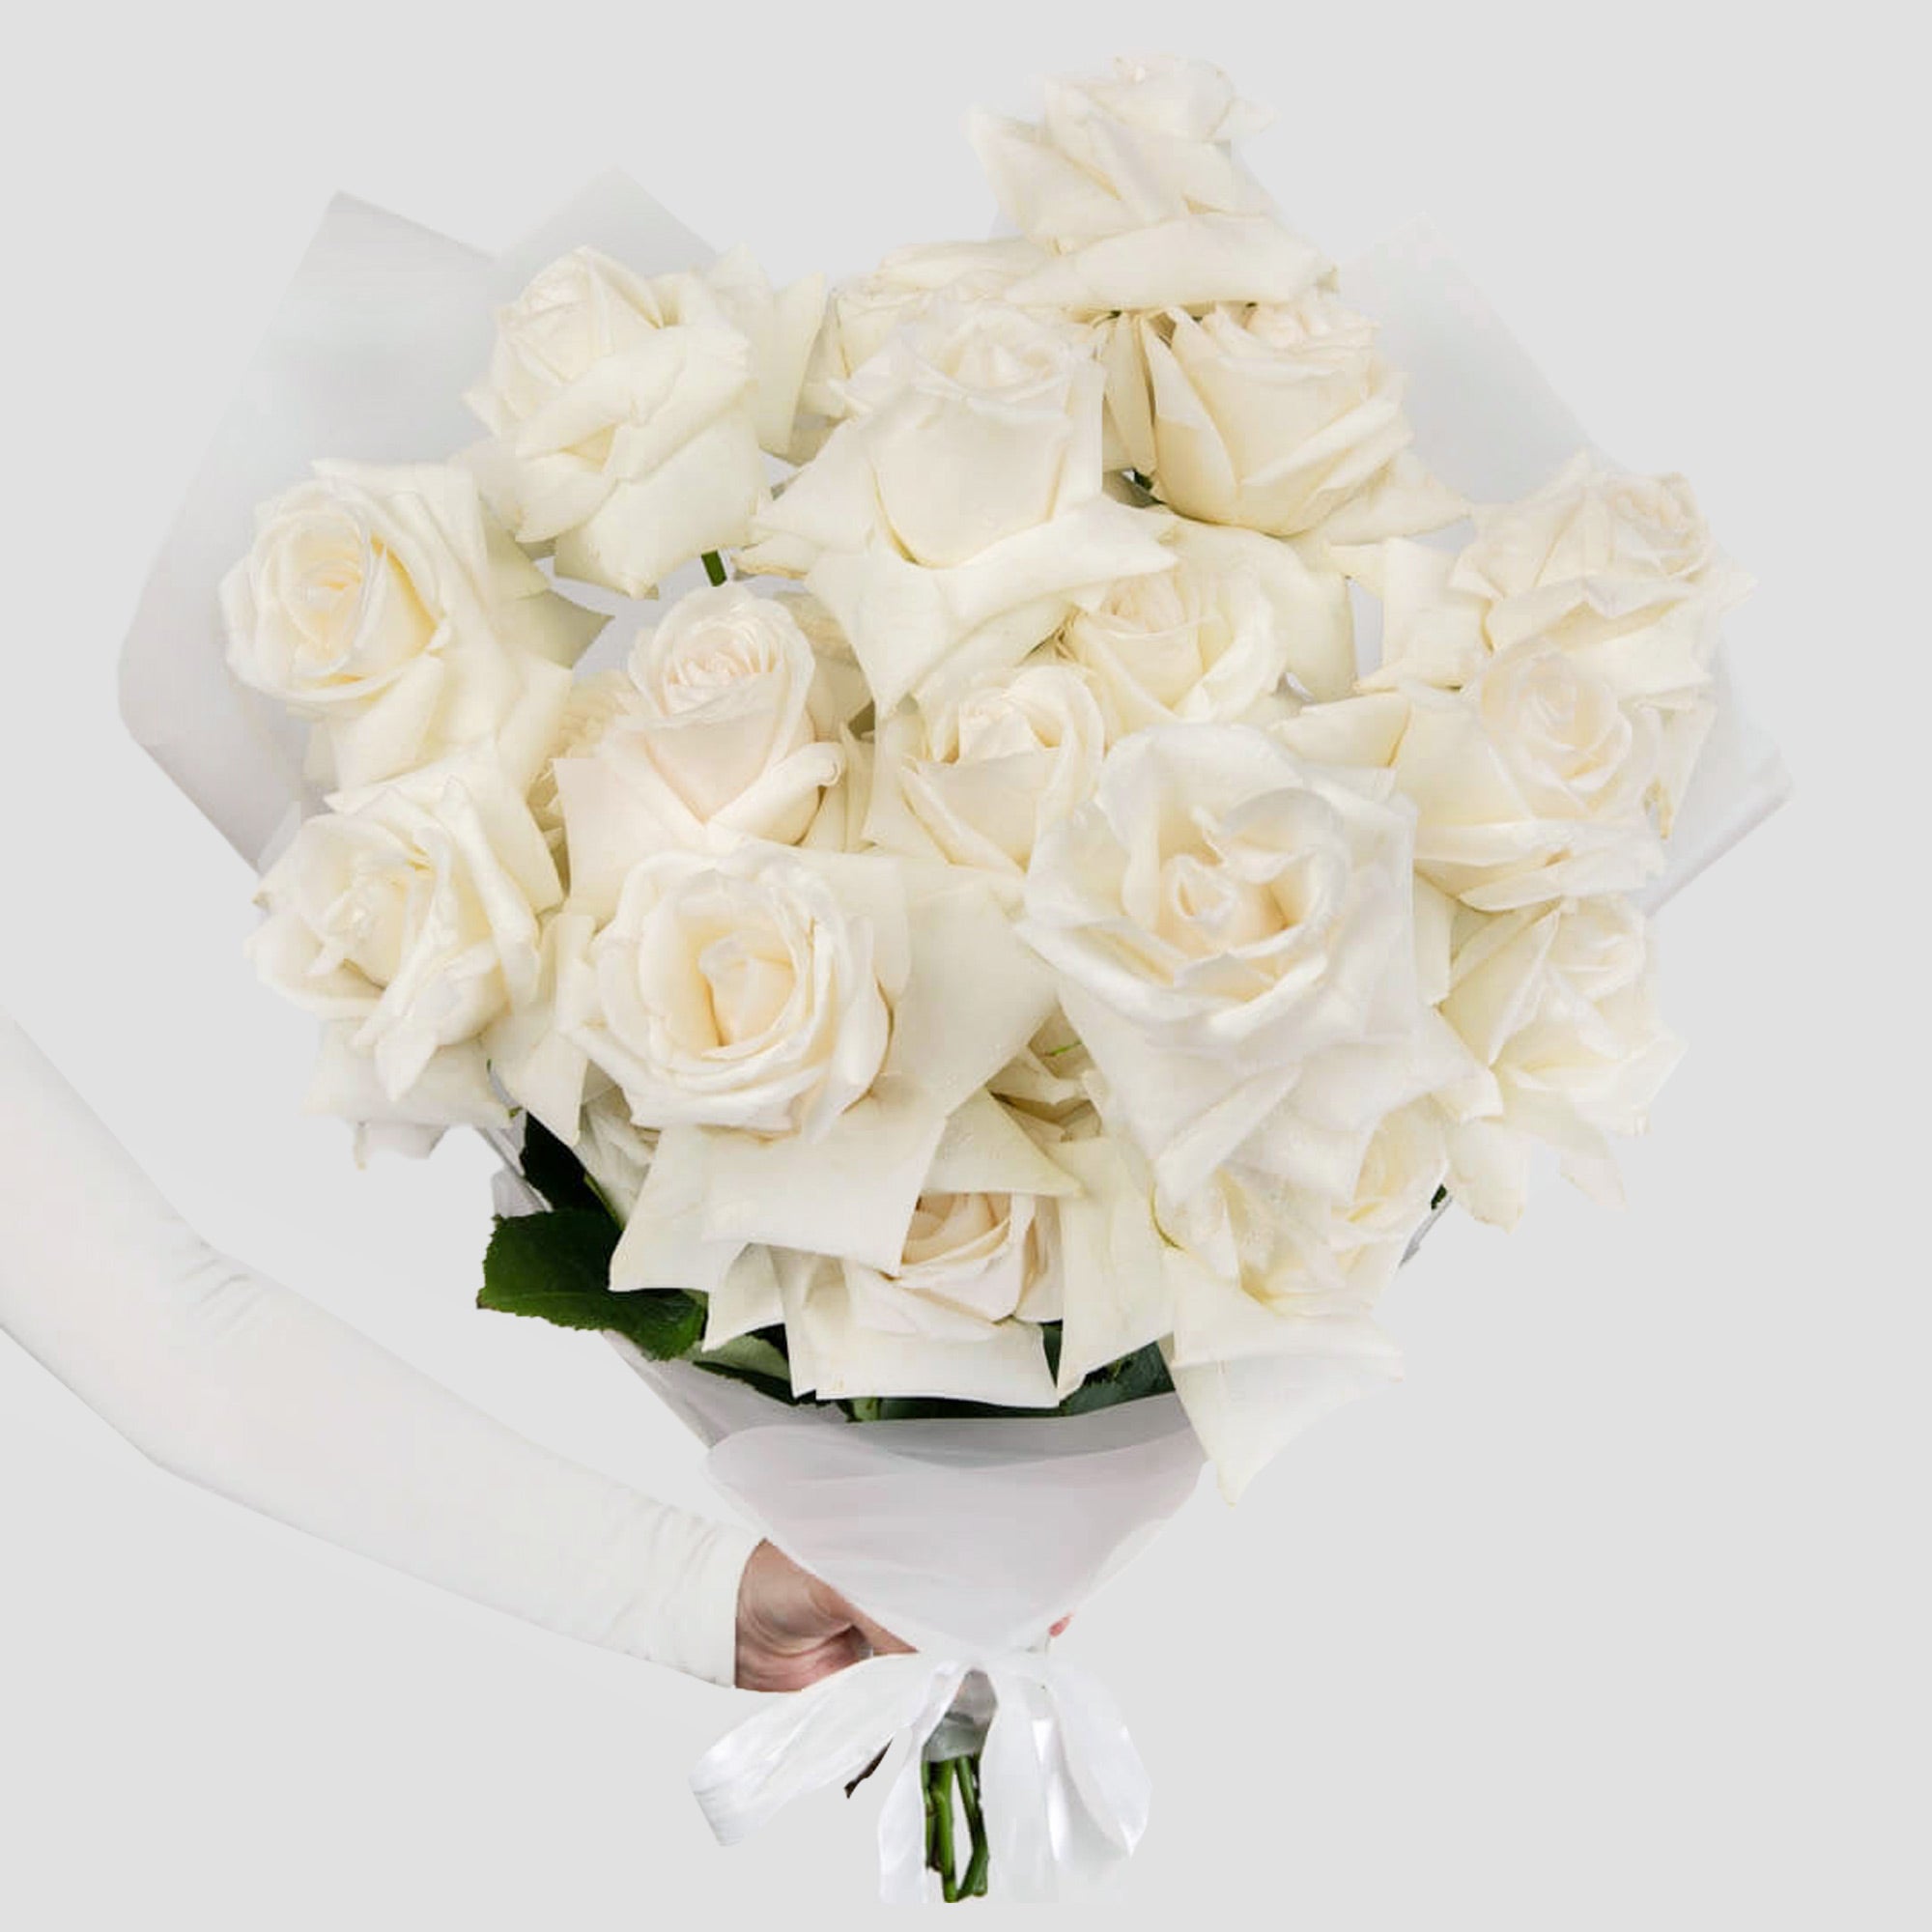 Bouquet of 25 special white roses